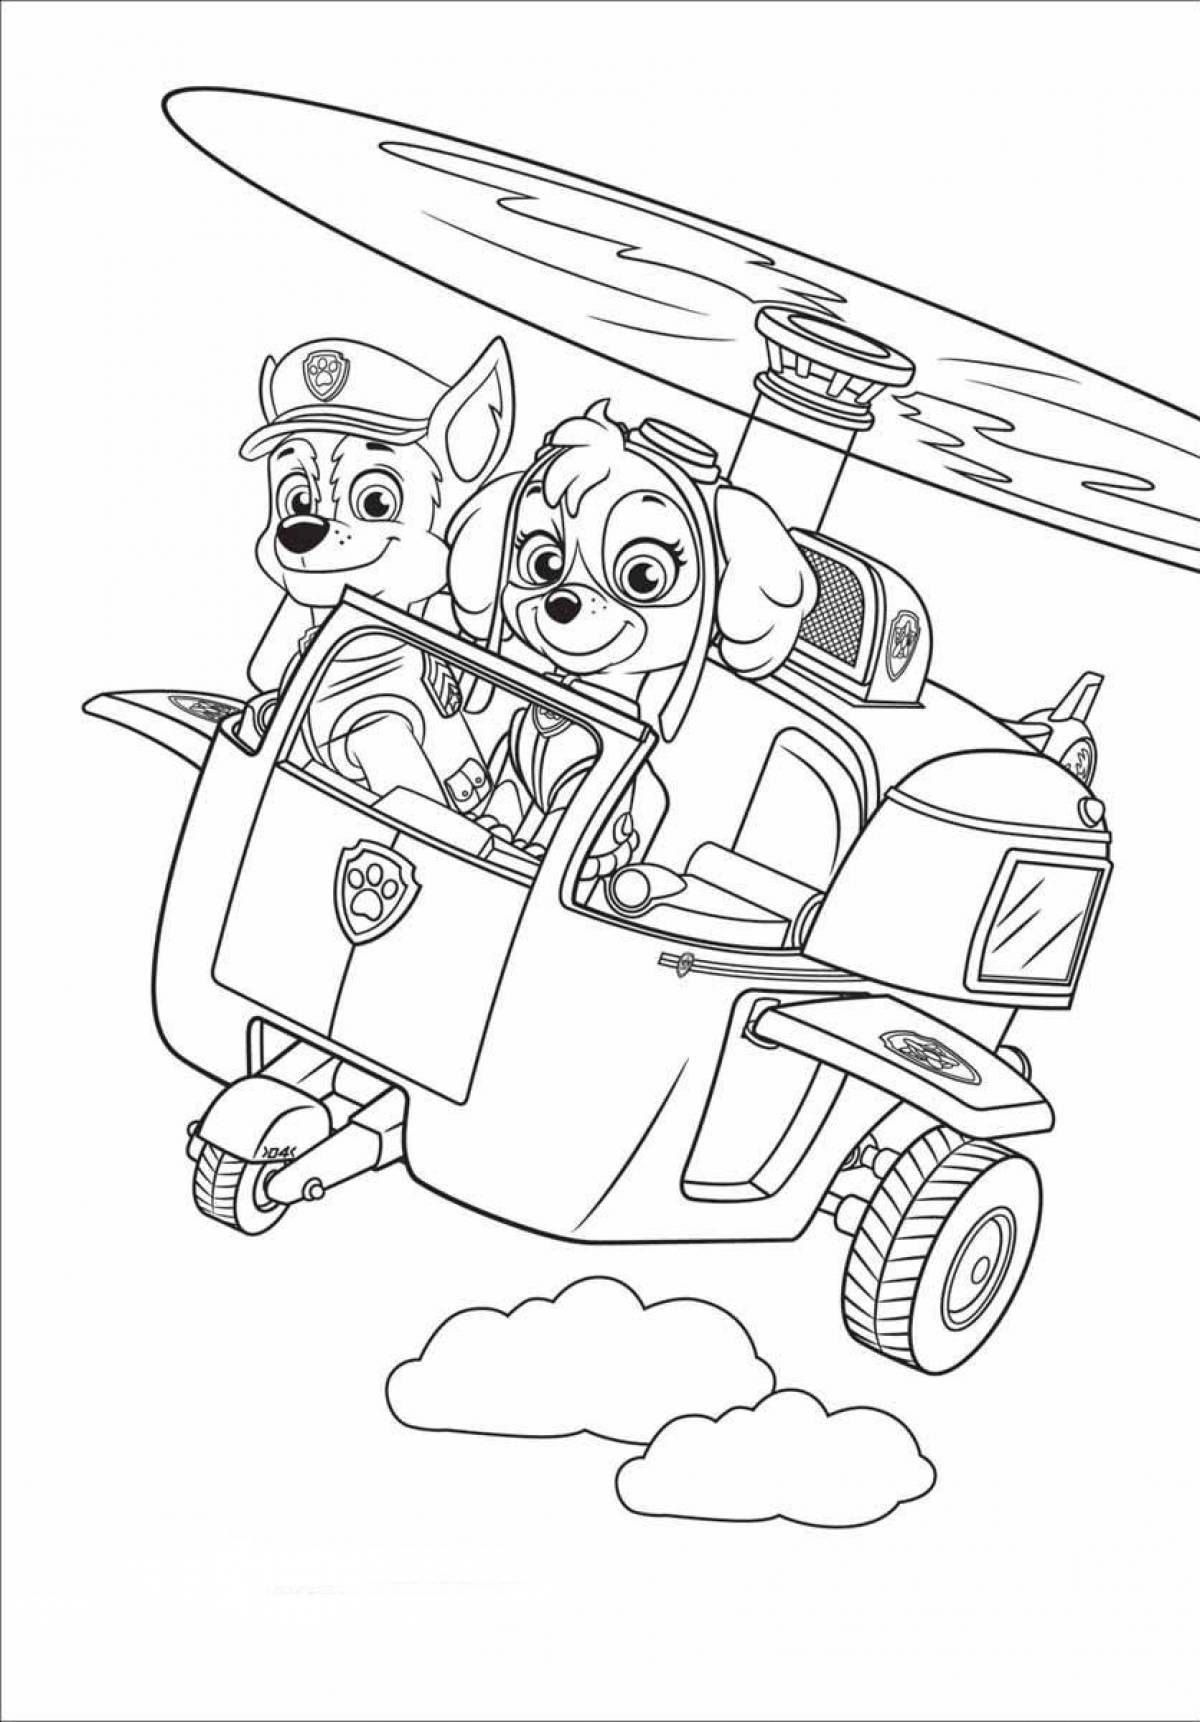 Glimmering sky paw patrol coloring page